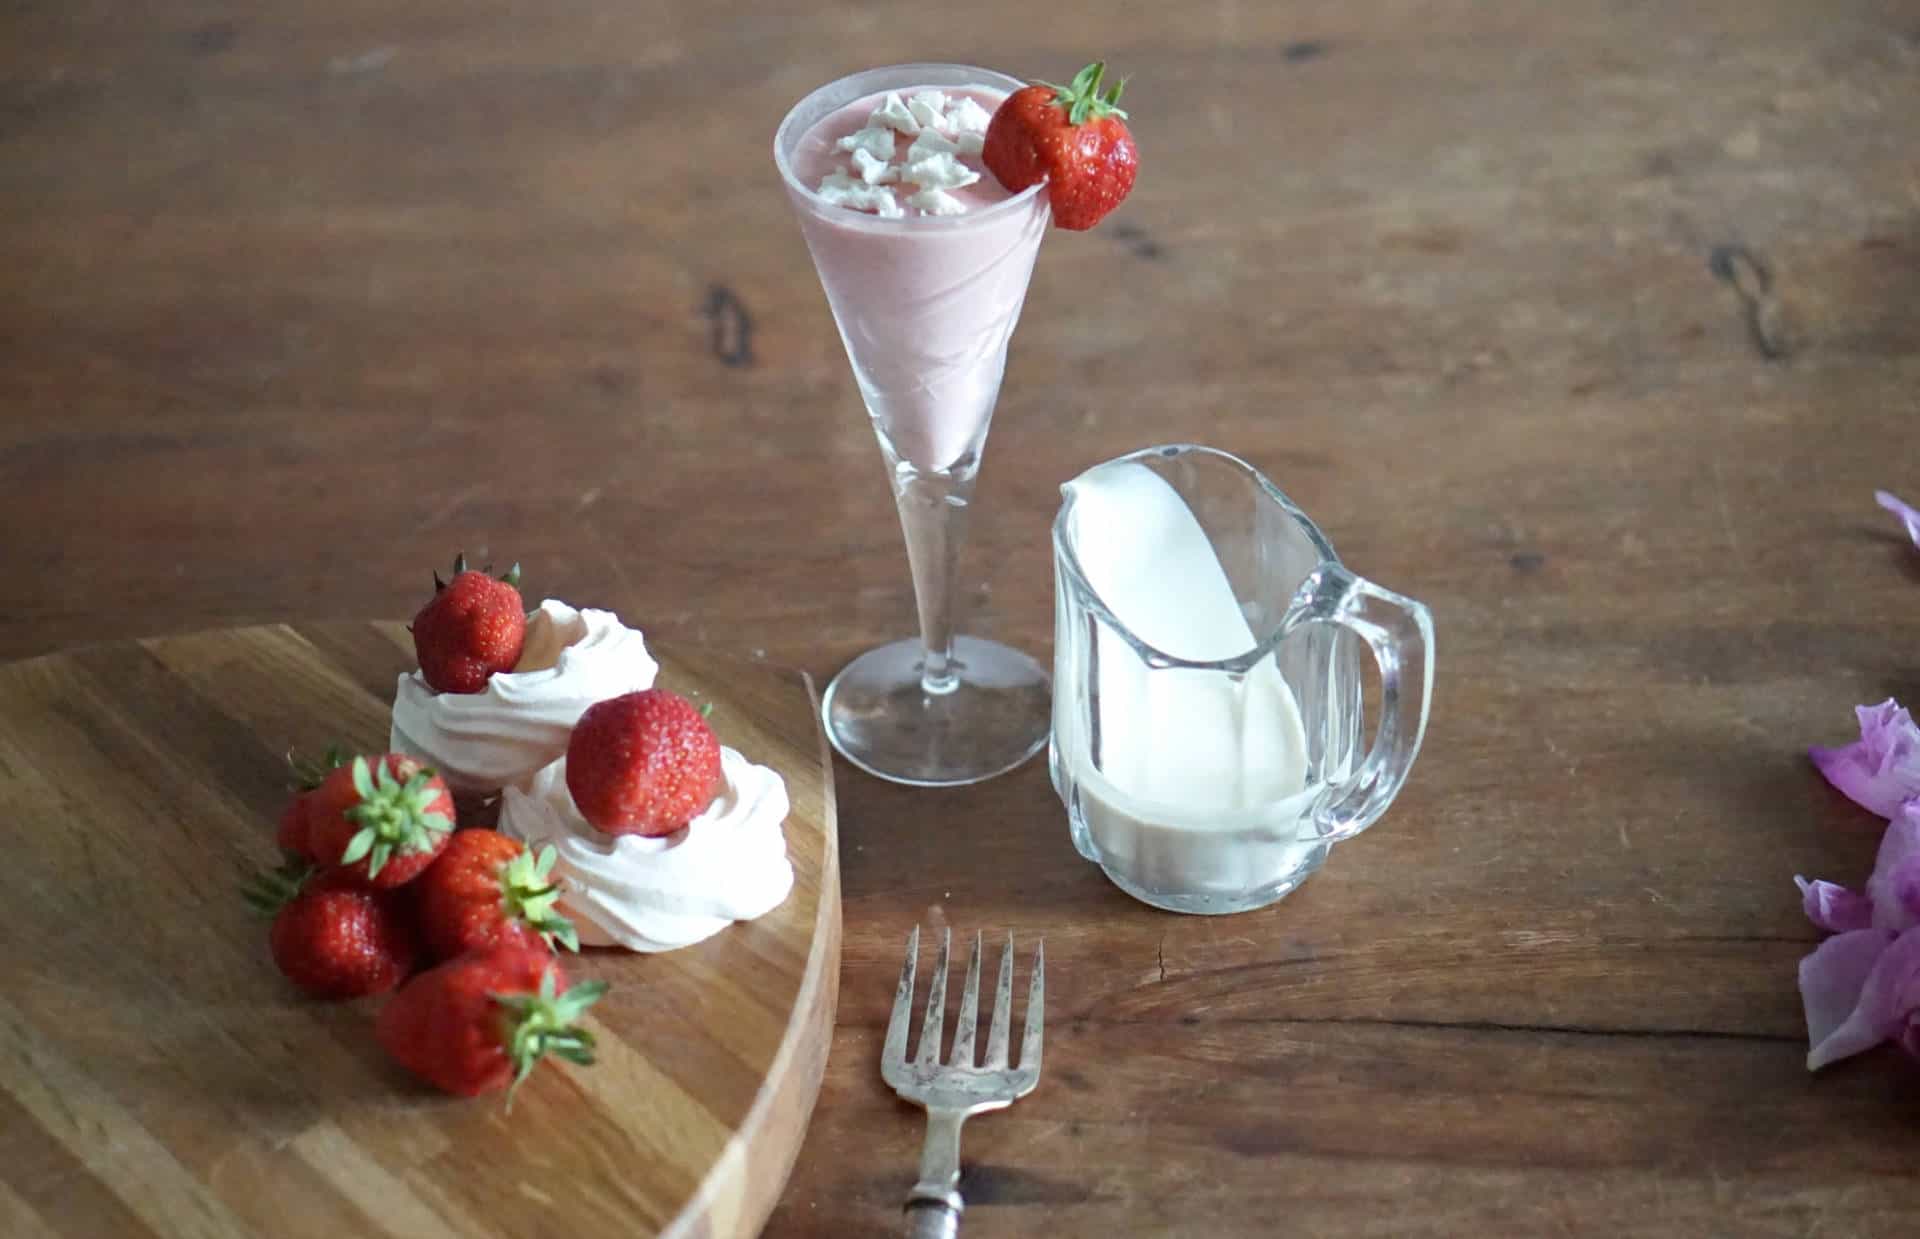 Strawberries and Cream Cocktail